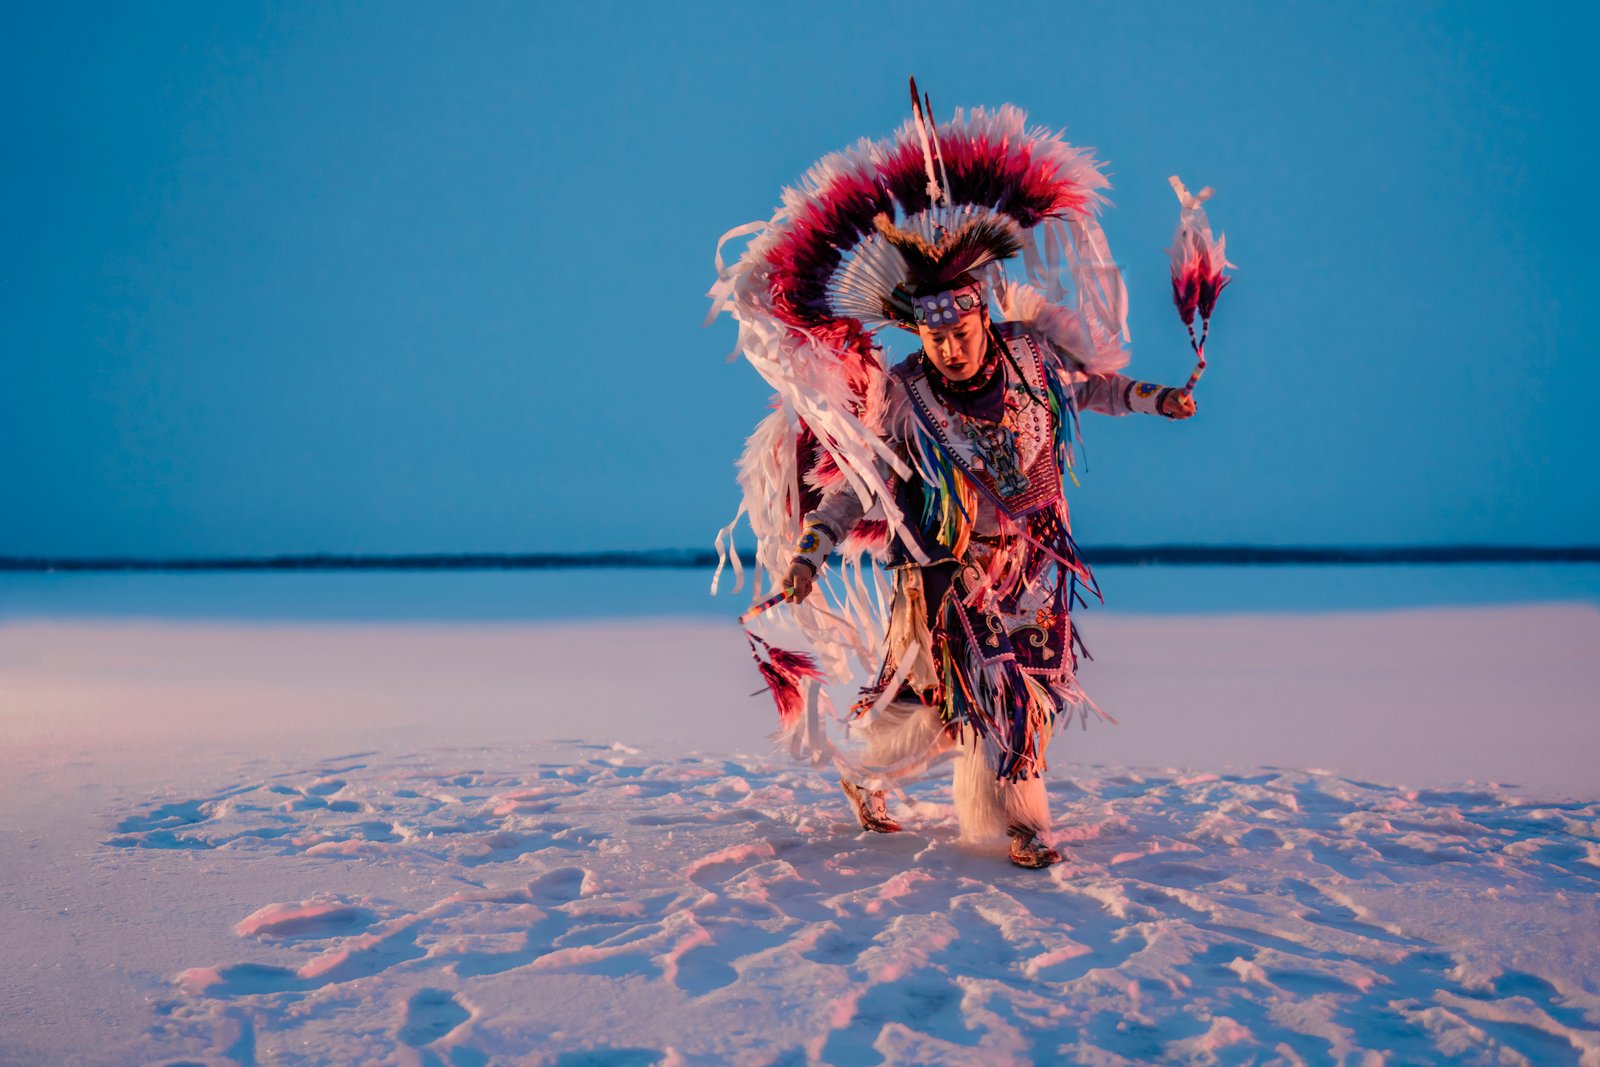 Indigenous dancer focused on their movement on the beach.